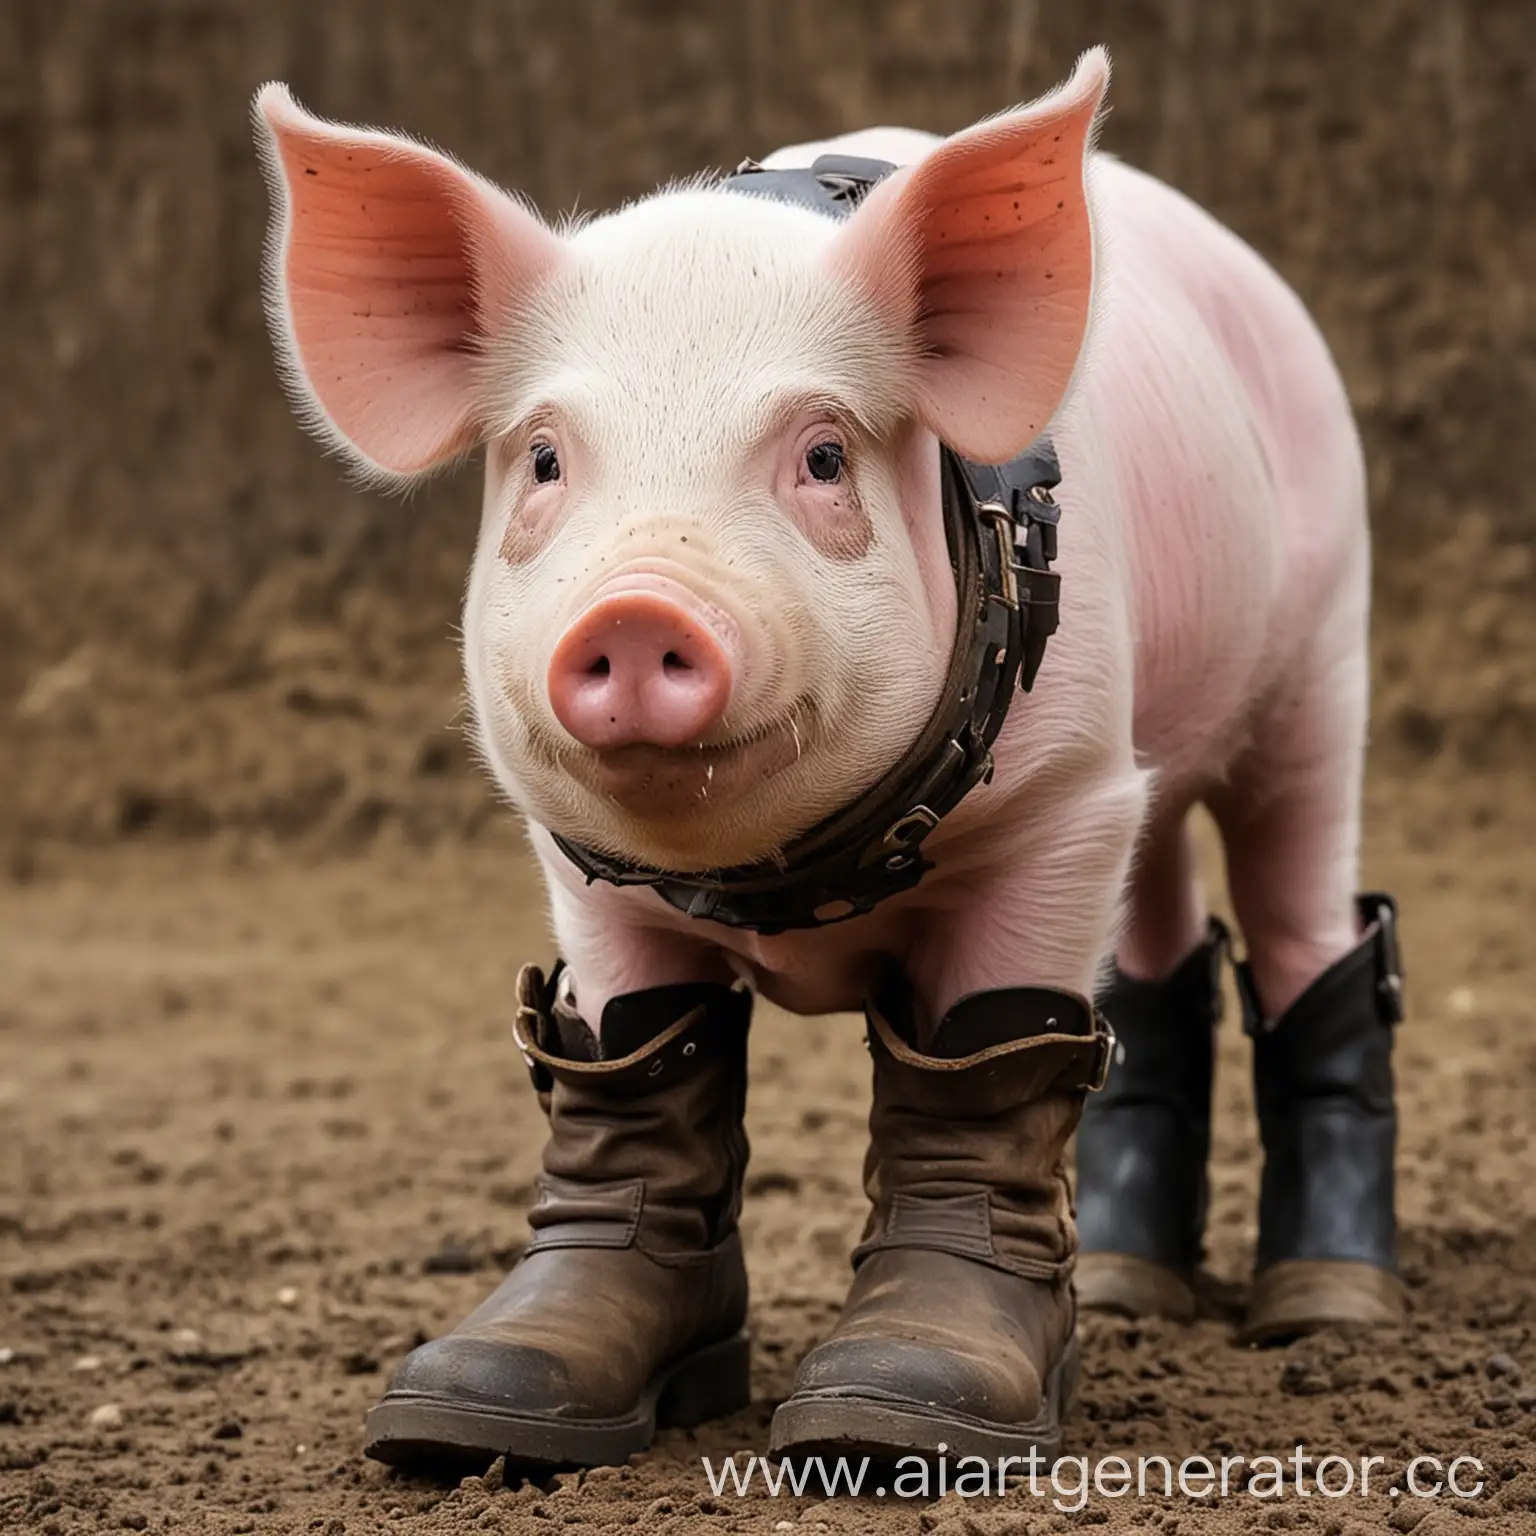 Pig-Wearing-Muzzle-and-Boots-in-Rustic-Farm-Setting